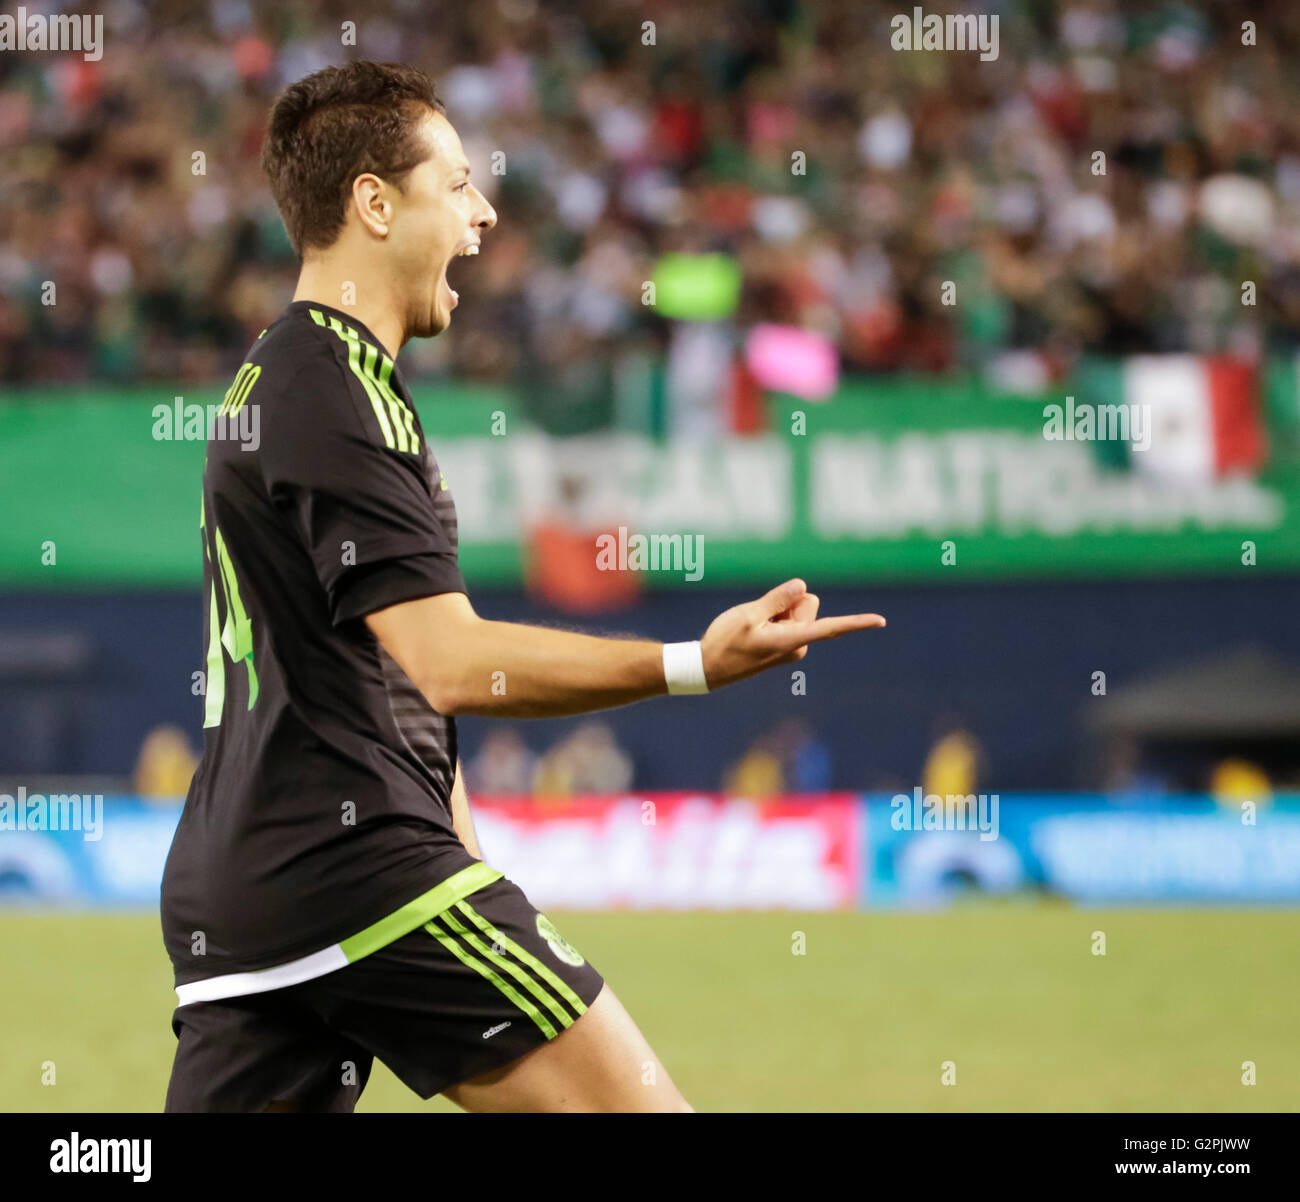 San Diego, California, USA. 01st June, 2016. Mexican Forward #14 Javier ''Chicharito'' Hernandez celebrates his goal during an international soccer match between Mexico and Chile at Qualcomm Stadium in San Diego, California. Mexico defeats Chile 1-0. Justin Cooper/CSM/Alamy Live News Stock Photo